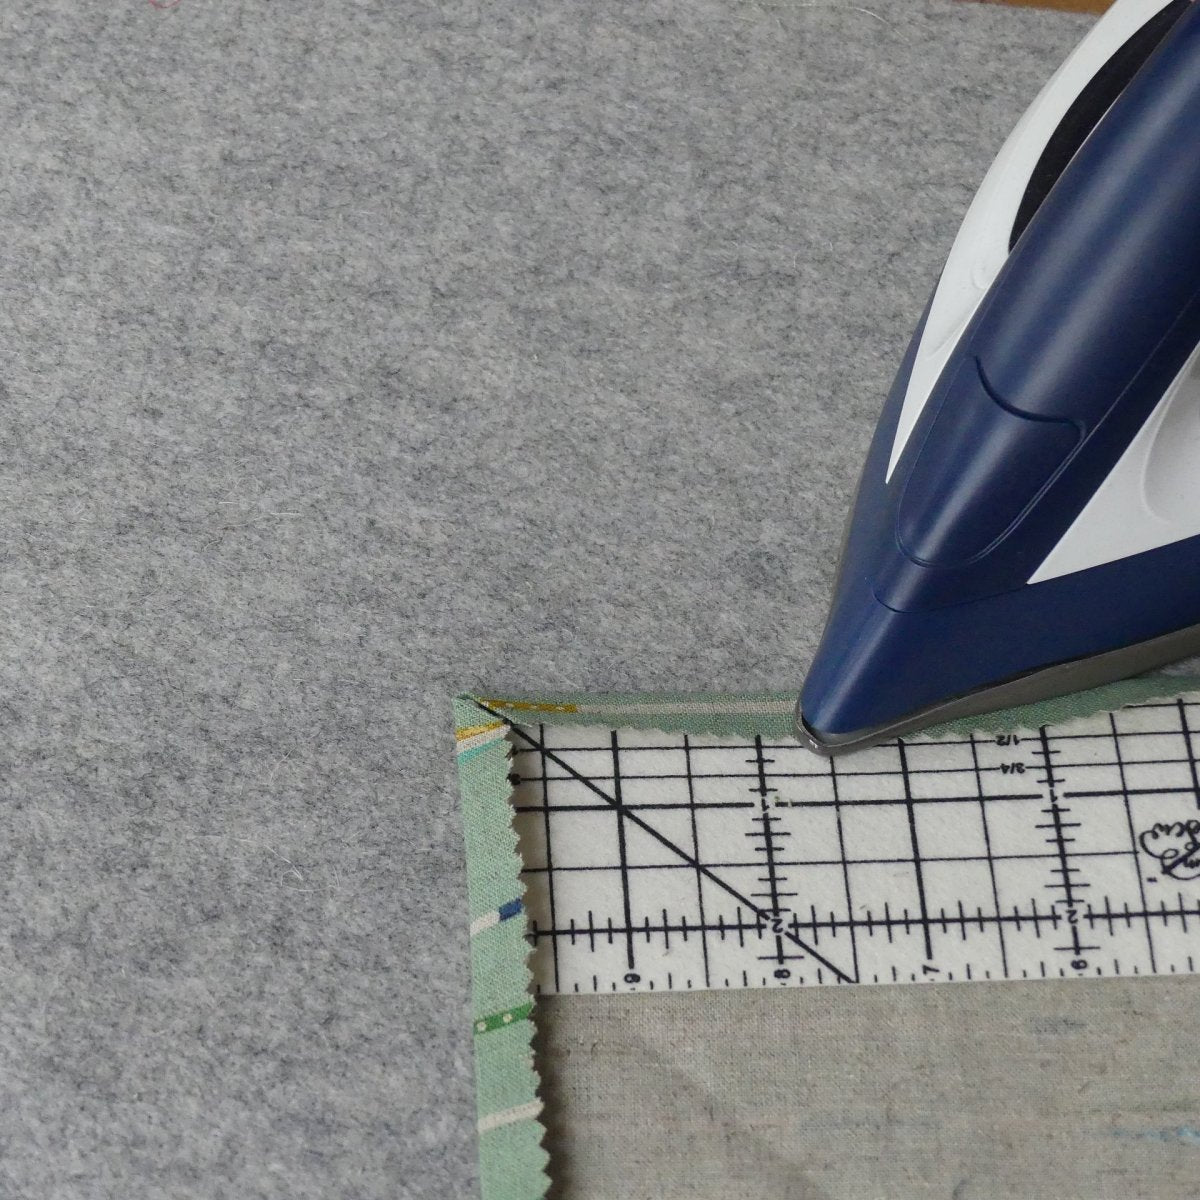 Ironing mitered corners with the Hot Hem Ruler